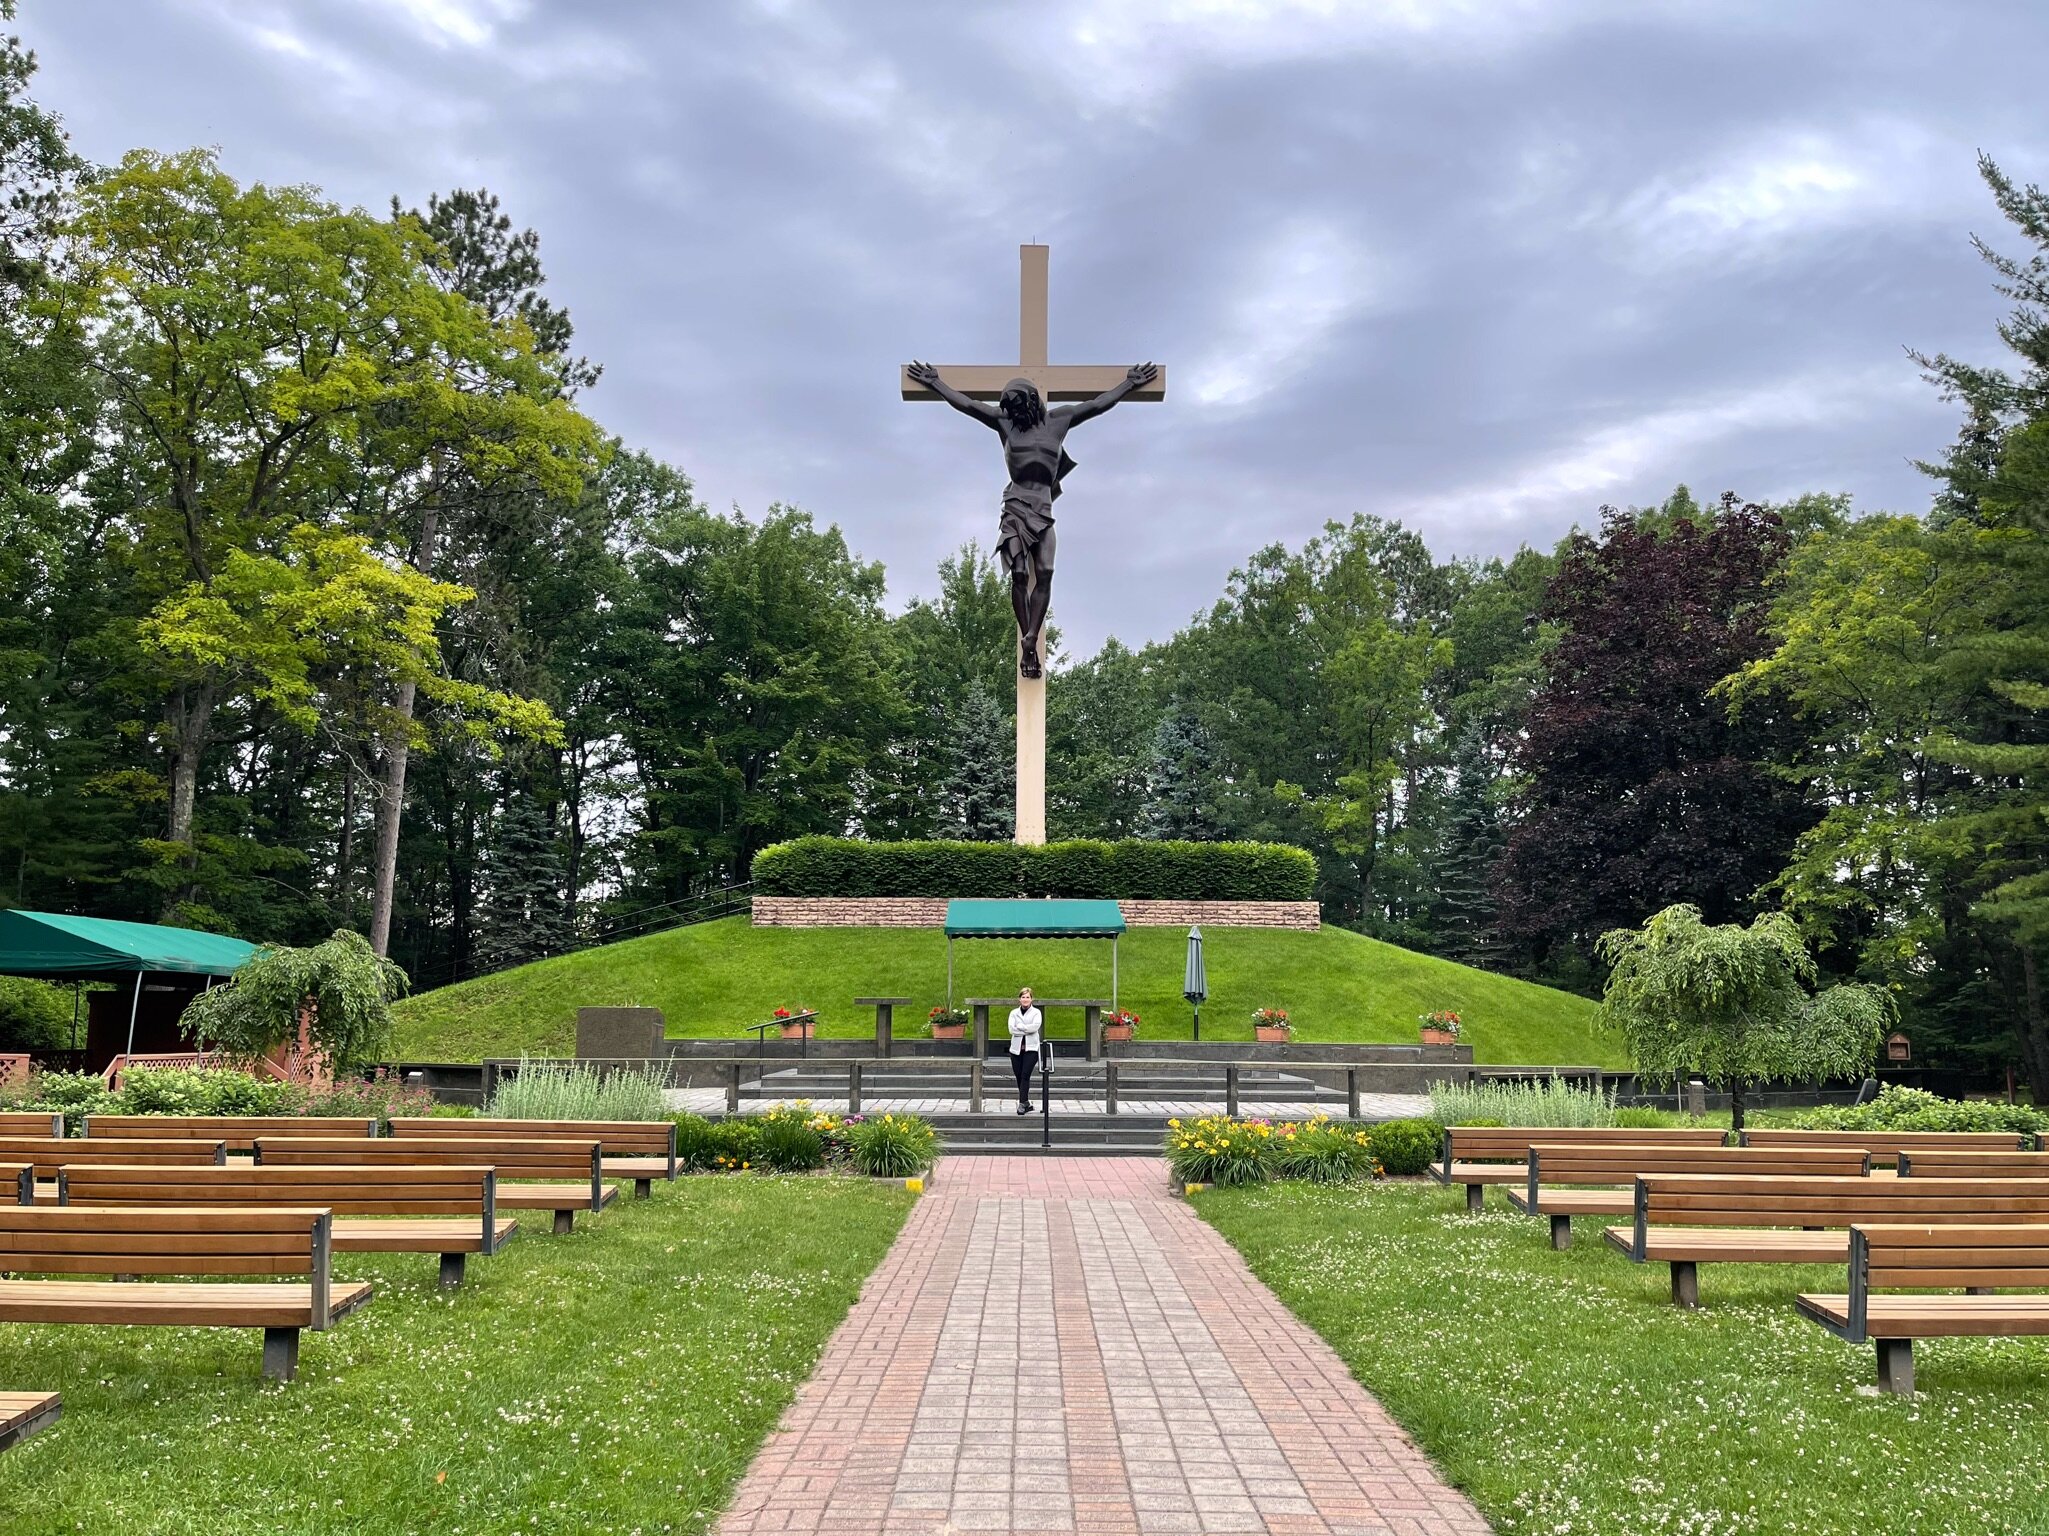  In Indian Springs, (close to the tip of the middle finger ✋🏻) we found  Cross In the Woods  very close to our RV park. Cross in the Woods is a 31-foot wooden cross and bronze figure of Jesus by sculptor Marshall Fredericks, and is the largest in th